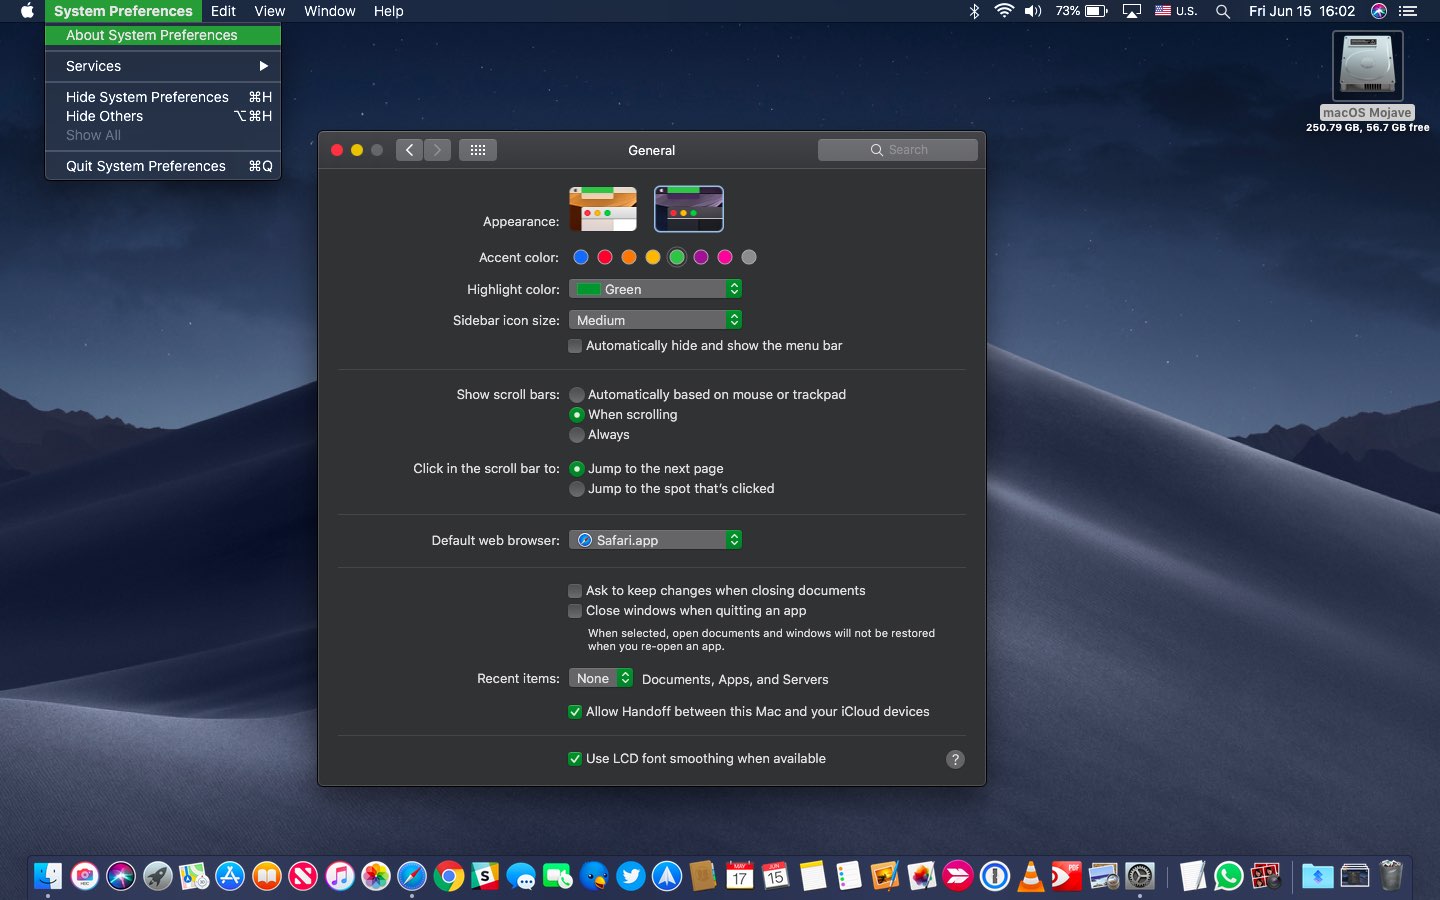 macOS Mojave Dark Mode with the green accent and highlight color